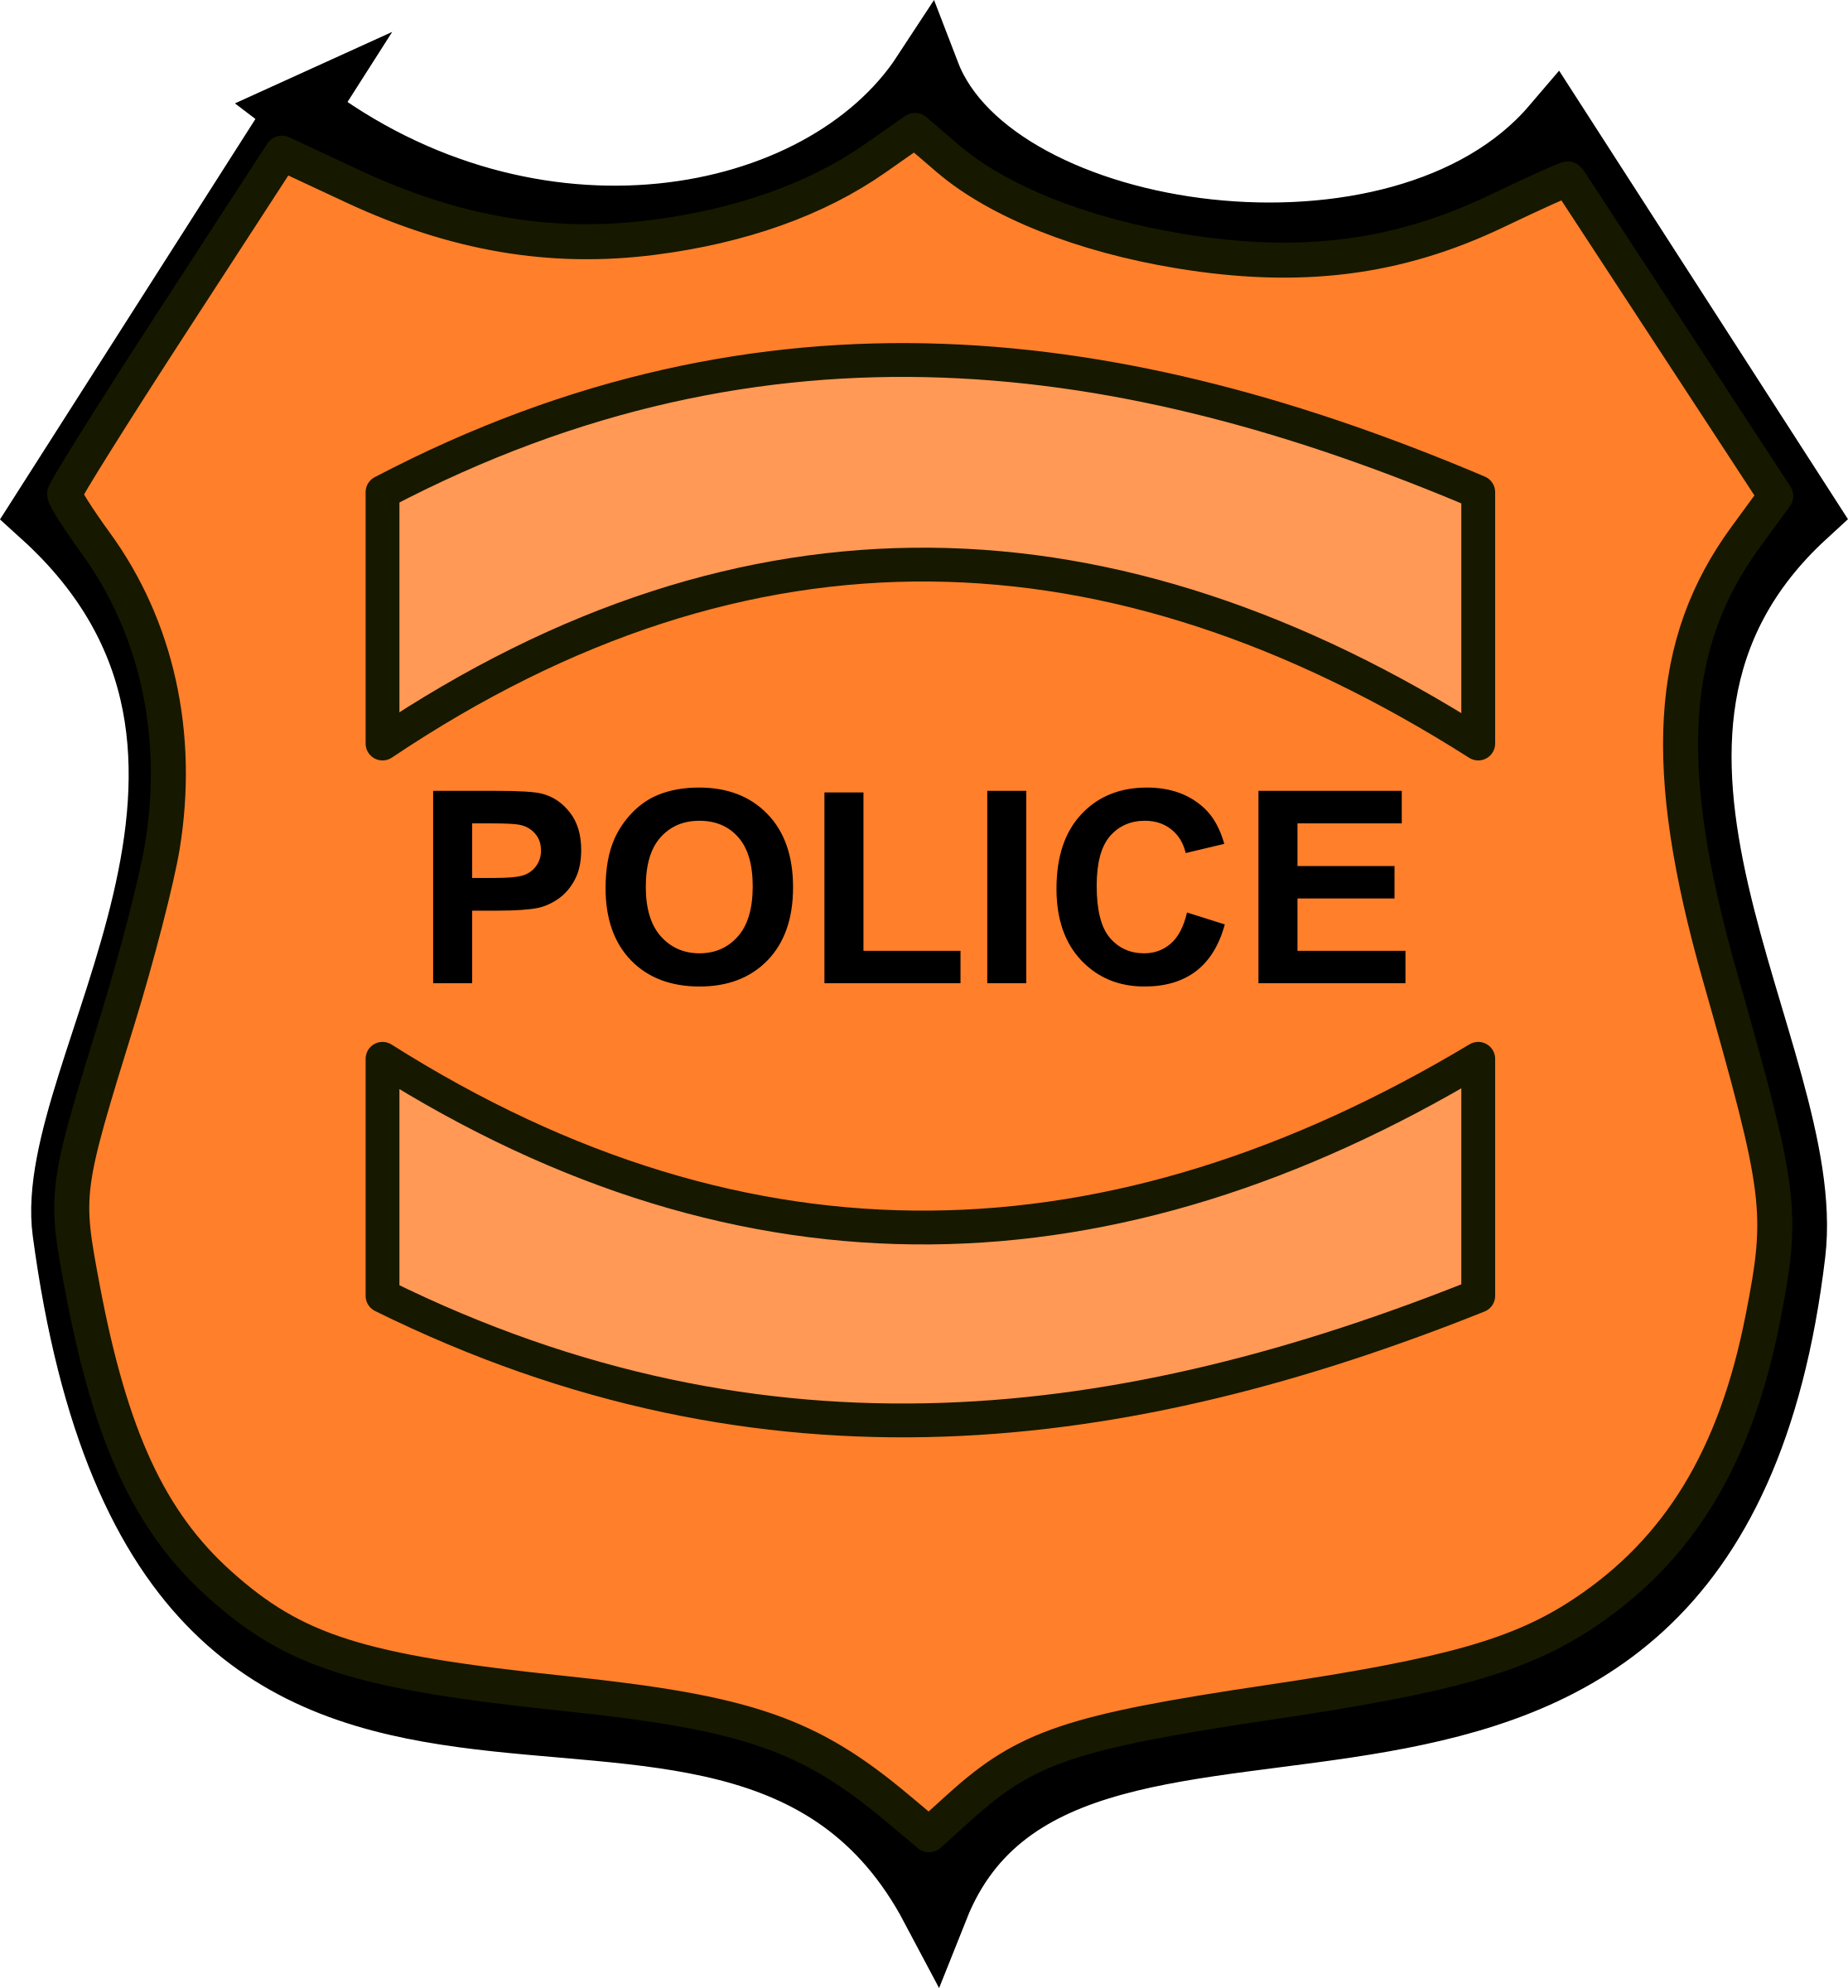 Clipart police officer | ClipartMonk - Free Clip Art Images